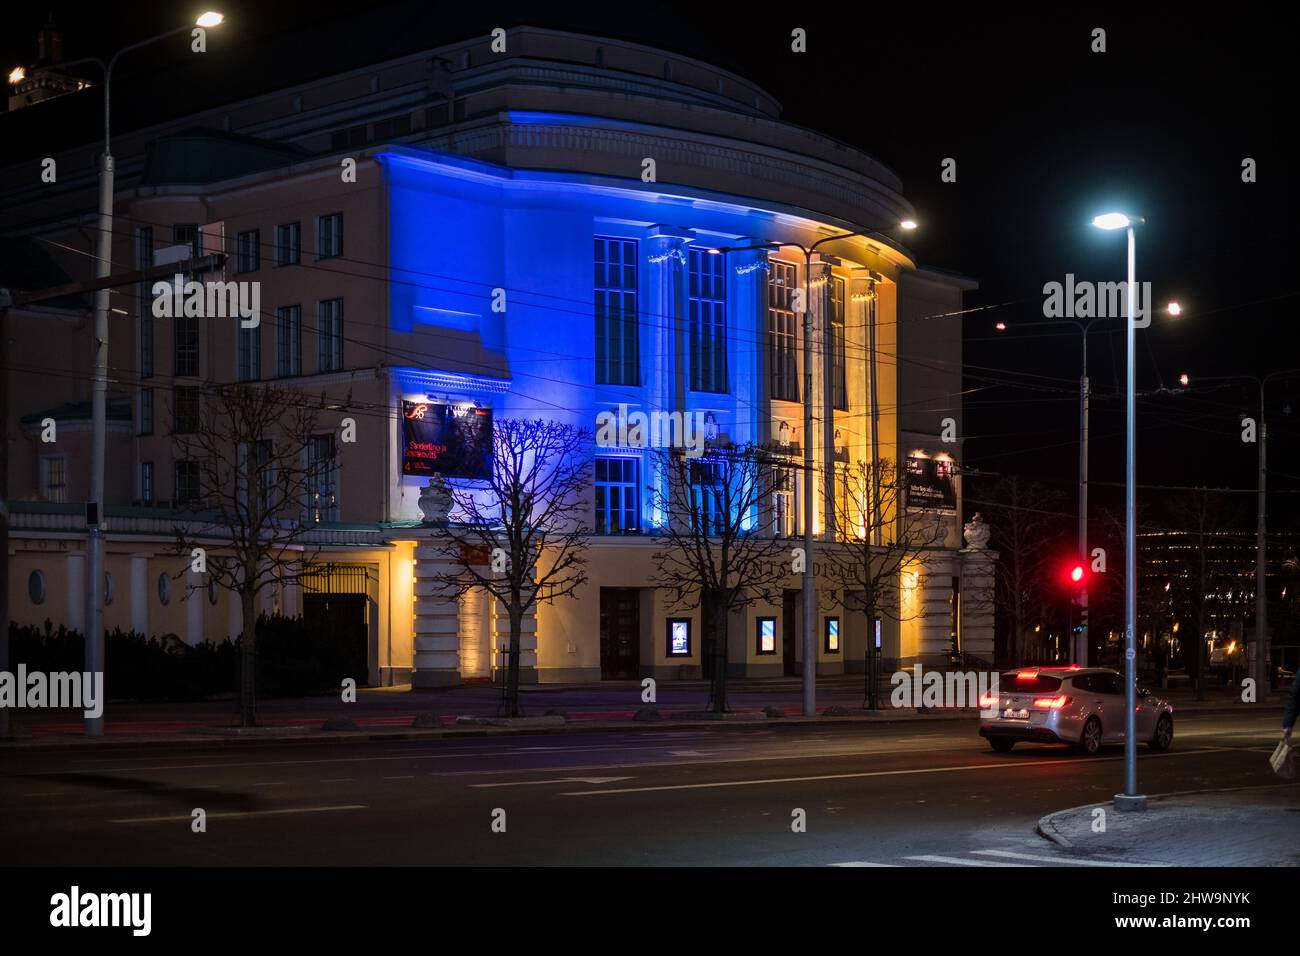 Estonian National Opera Theatre building at night in Ukrainian flag colours. Showing support for Ukraine. Stock Photo